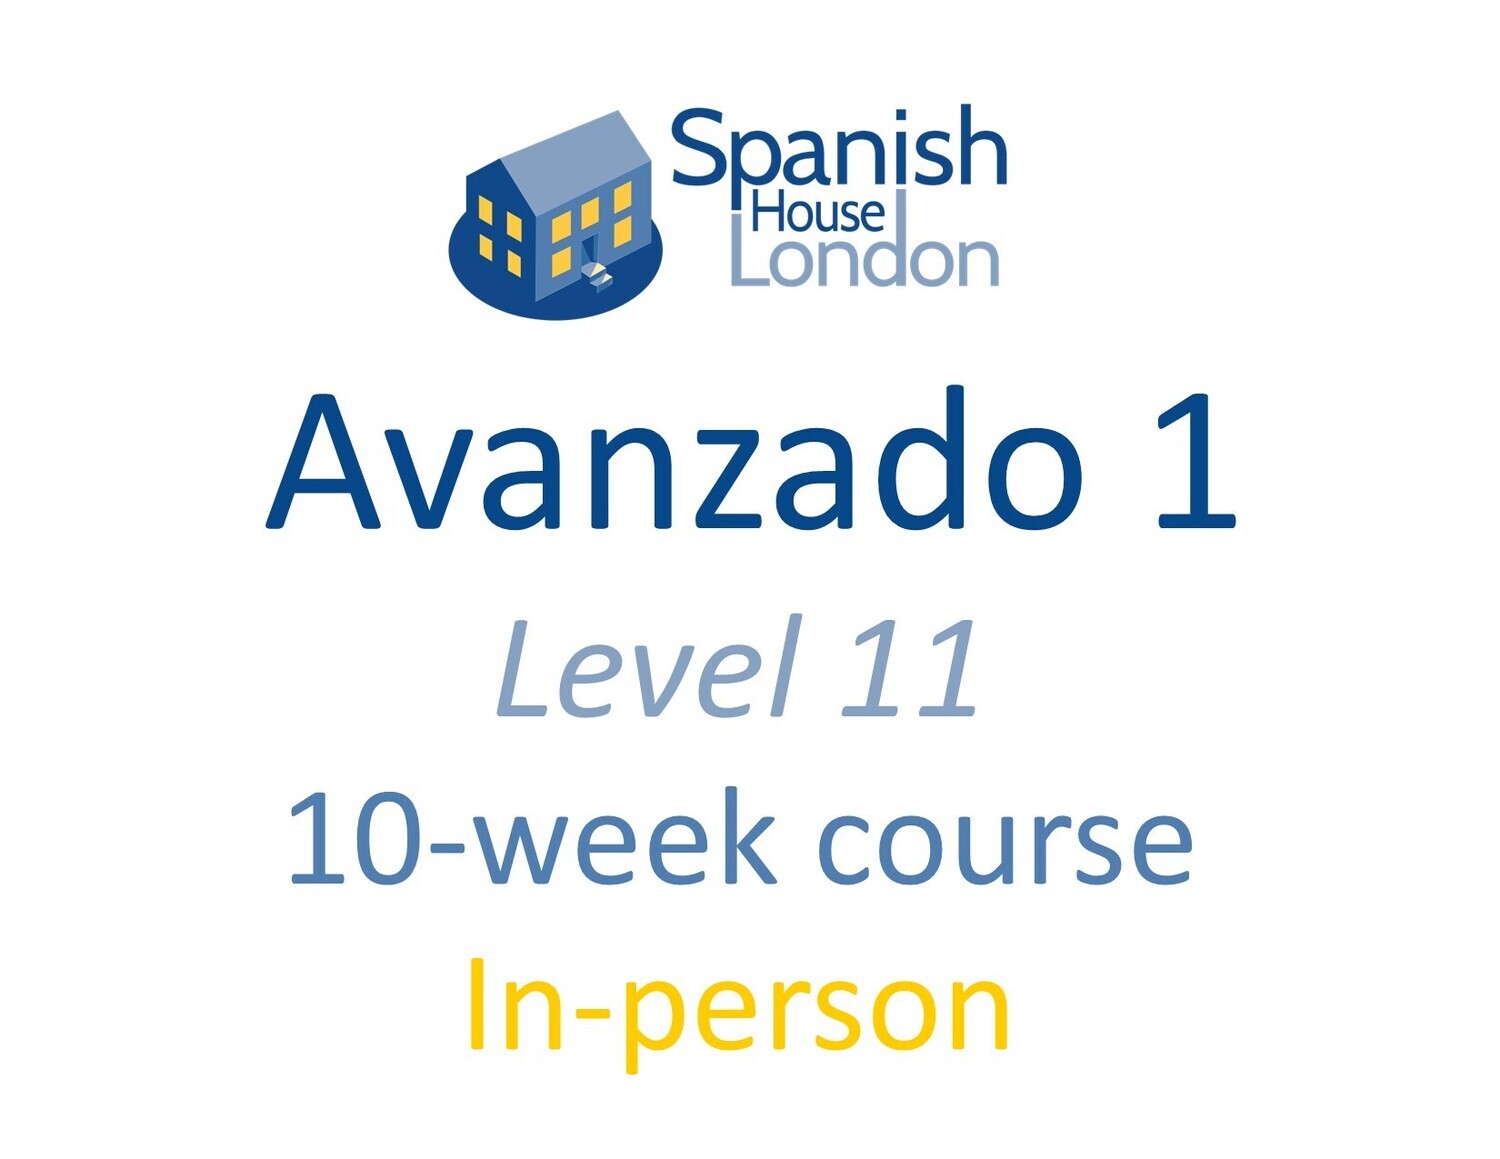 Avanzado 1 Course starting on 7th February at 7.30pm in Clapham North